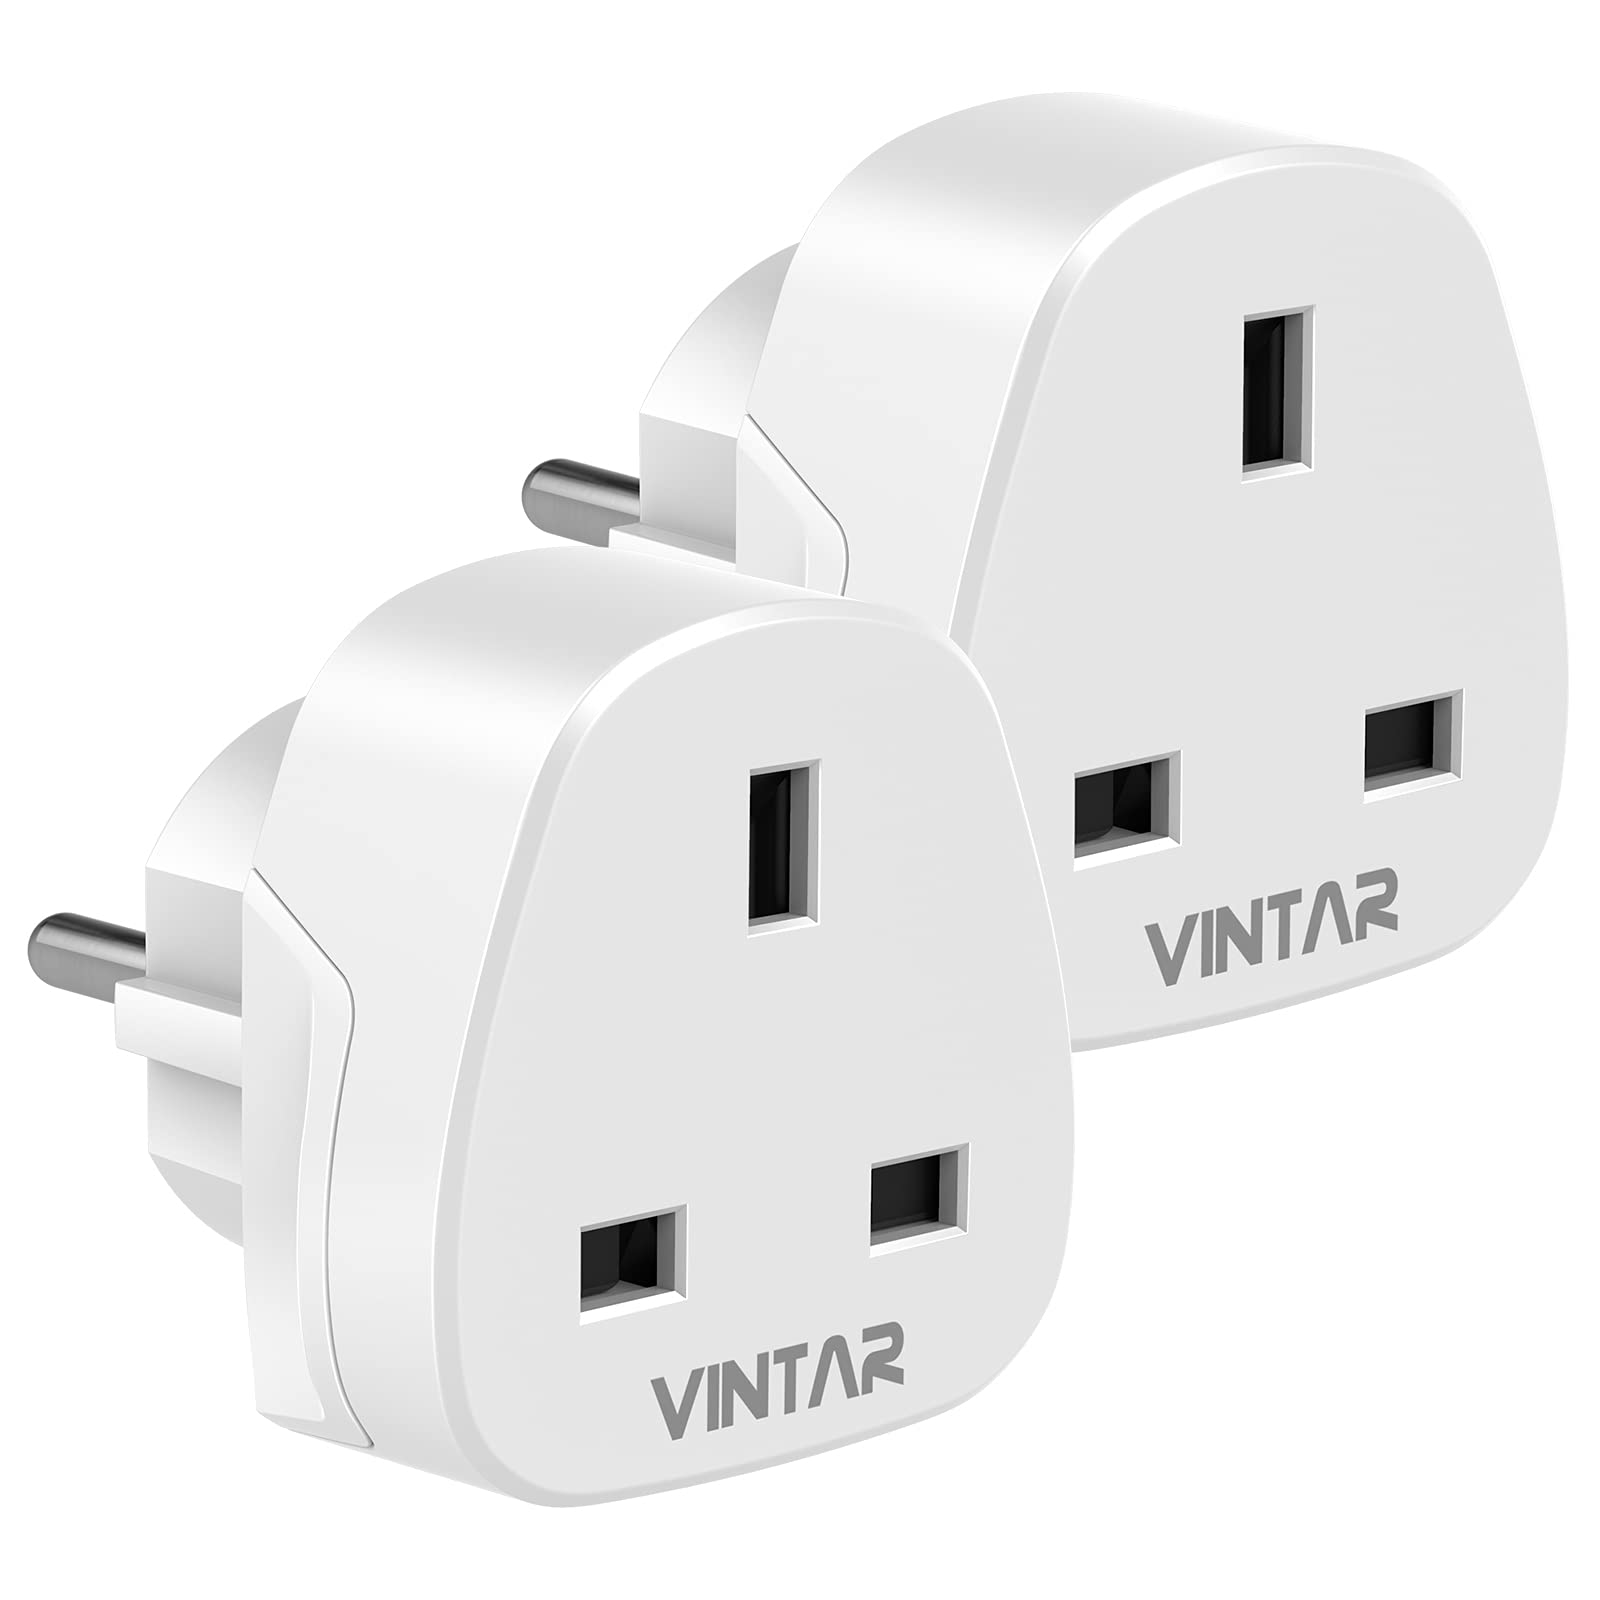 VINTAR UK to European Plug Adapter Round 3 Pin to 2 Pin Type G to Type C,E,F for Spain, France, Netherlands, Greece, Germany and Asia[2-packs]